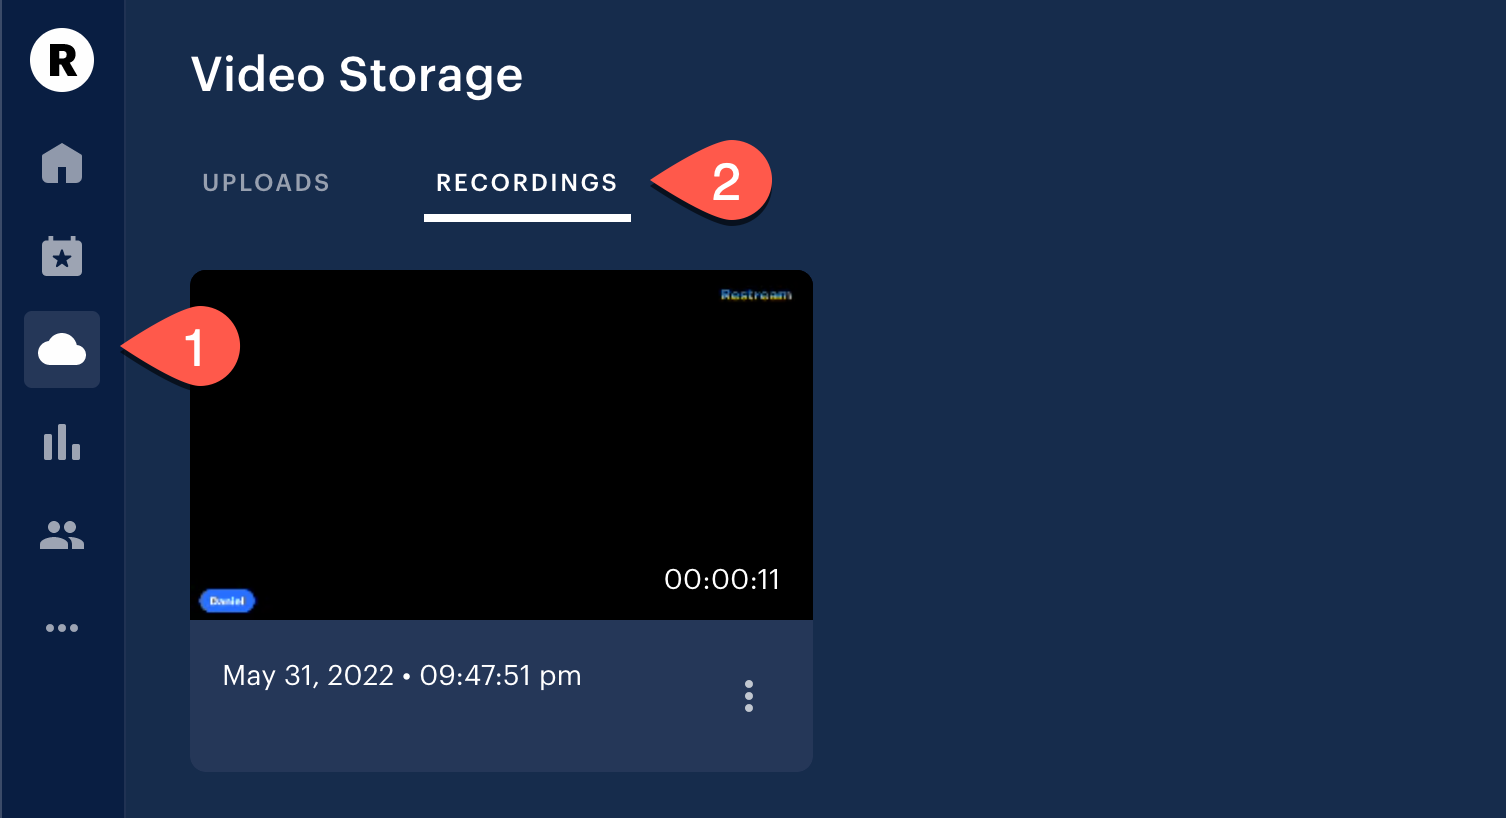 Video_Storage_Page_V02.png